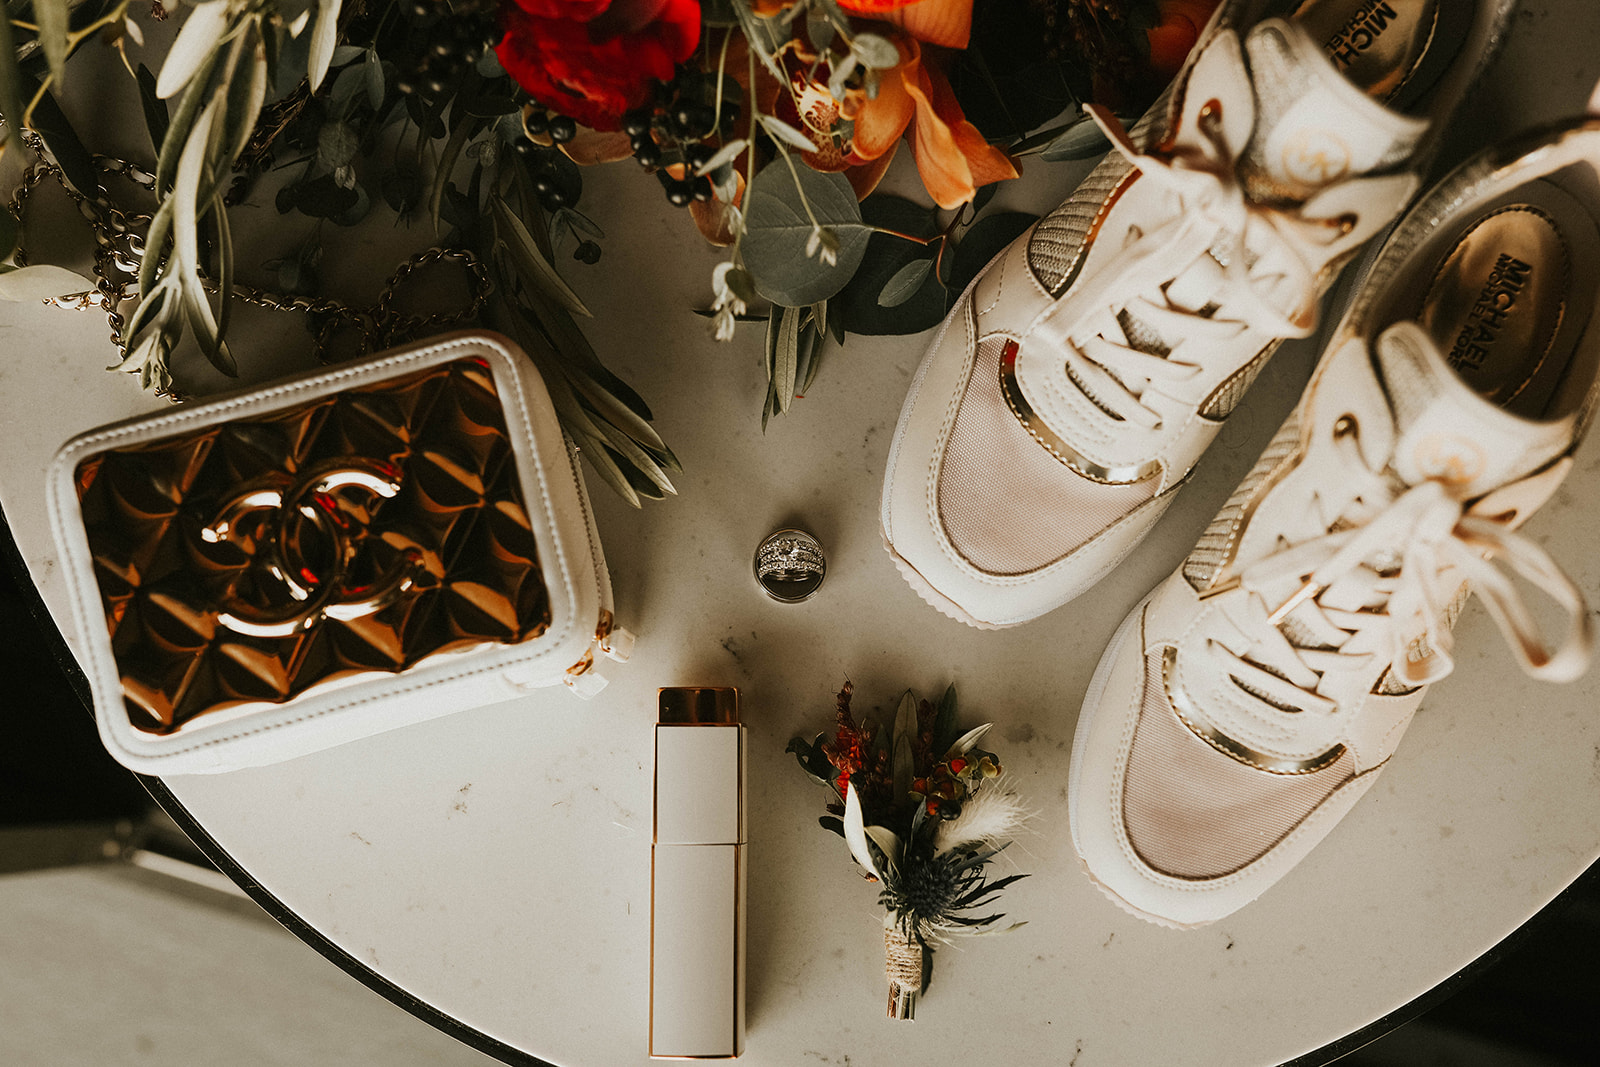 Wedding Details of Rings, Michael Kors Sneakers, Gold Chanel Purse, Fall Inspired Bouquet & Boutonniere in Dry Lake Bed Fall Inspired Elopement 